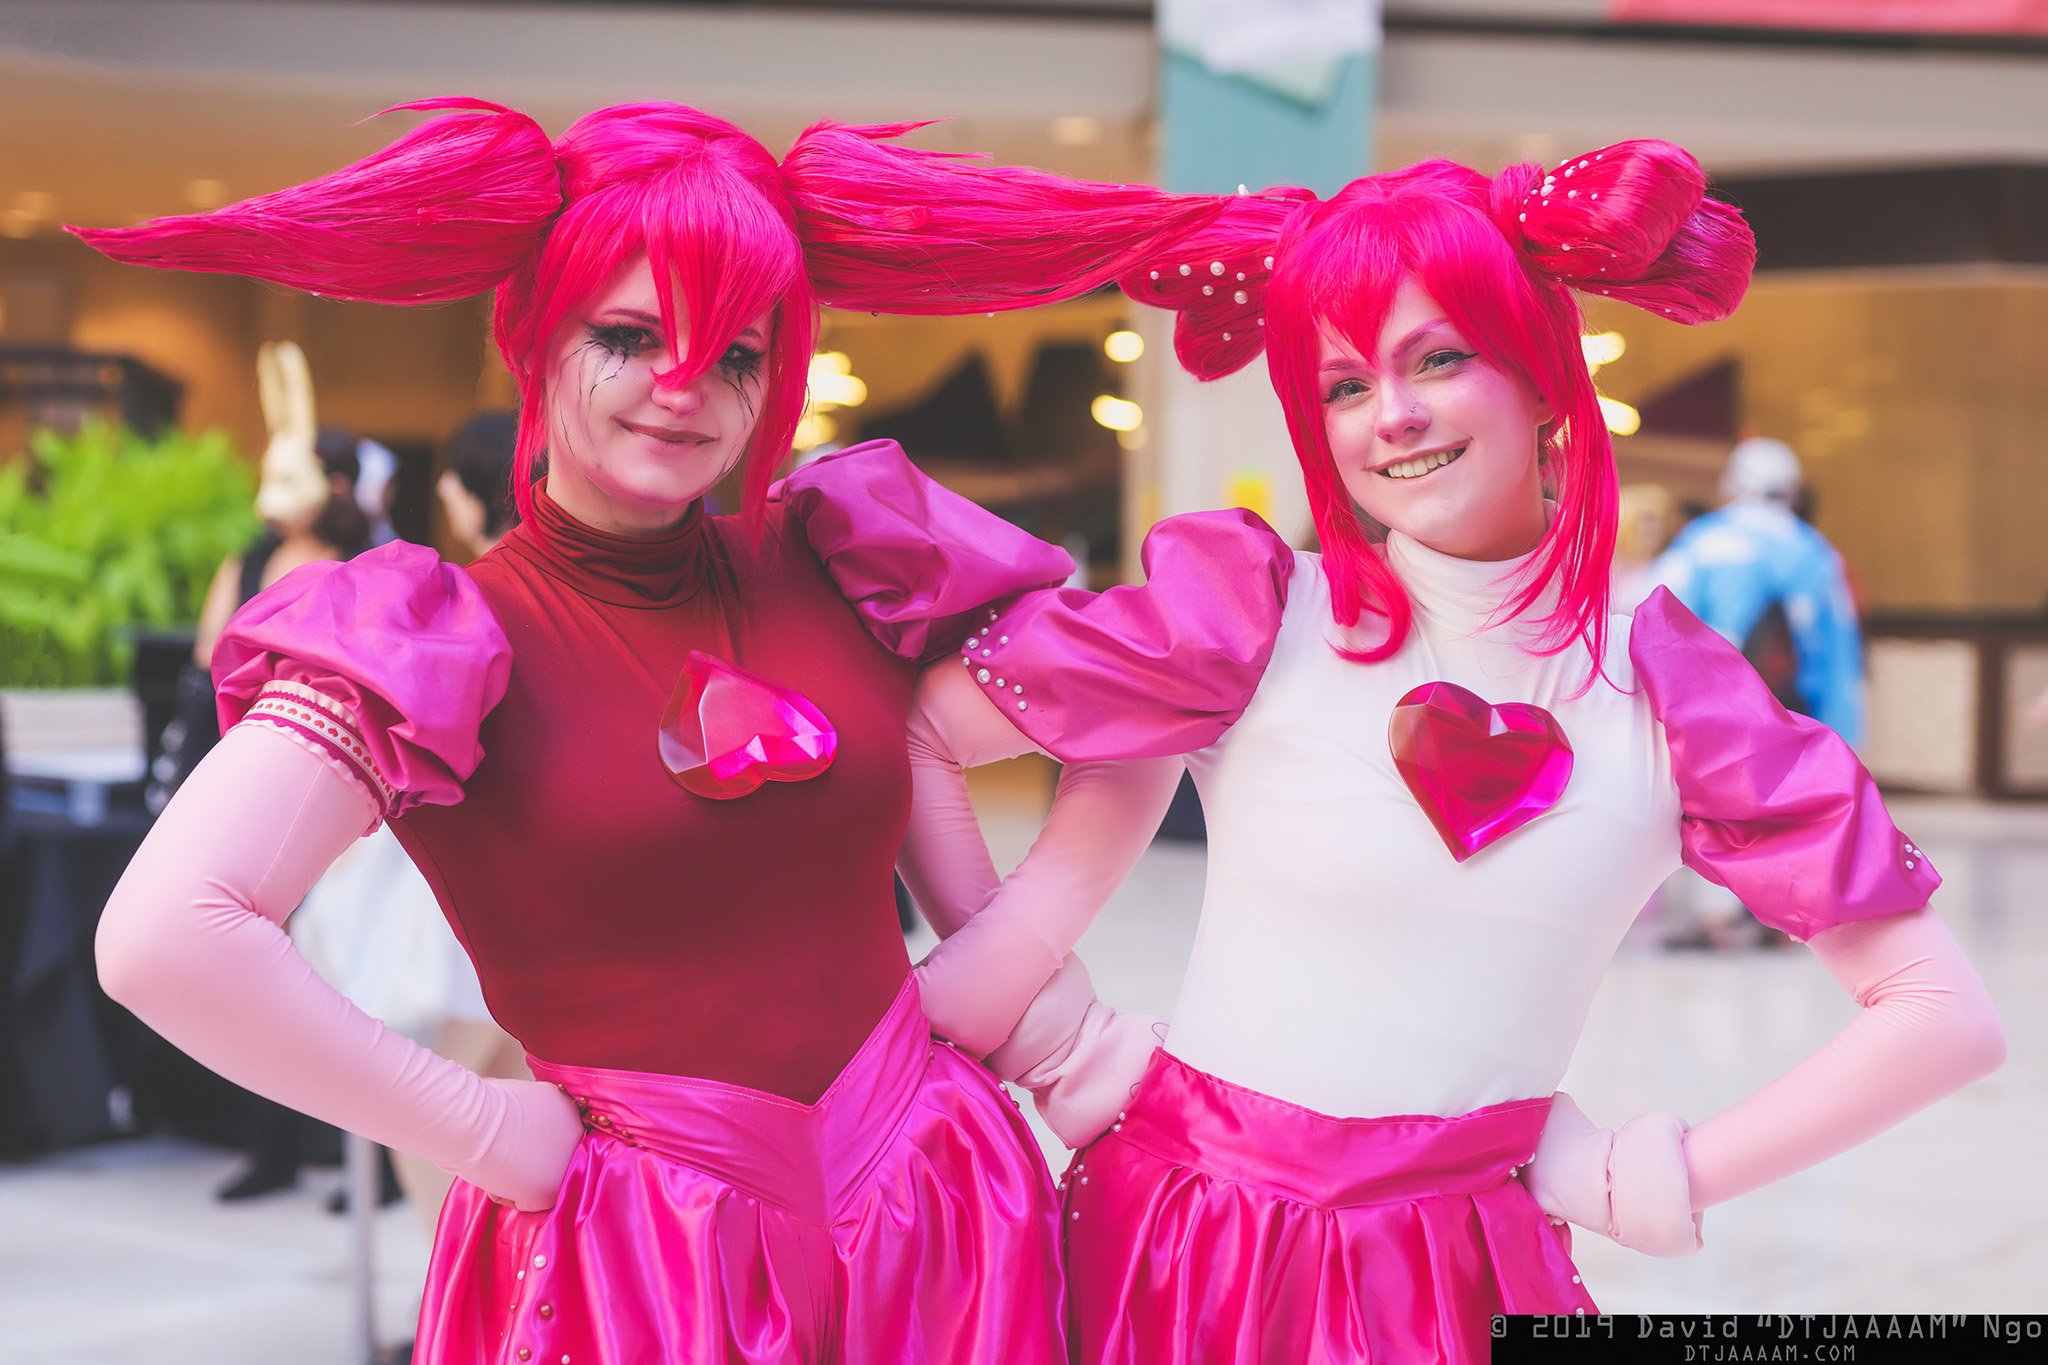 By the way Requirements Prisoner of war DTJAAAAM on Twitter: "The two faces of Spinel! #cosplay #awacon  #animeweekendatlanta #animeweekendatlanta2019 #awa2019  https://t.co/1XKOKOTqdP" / Twitter